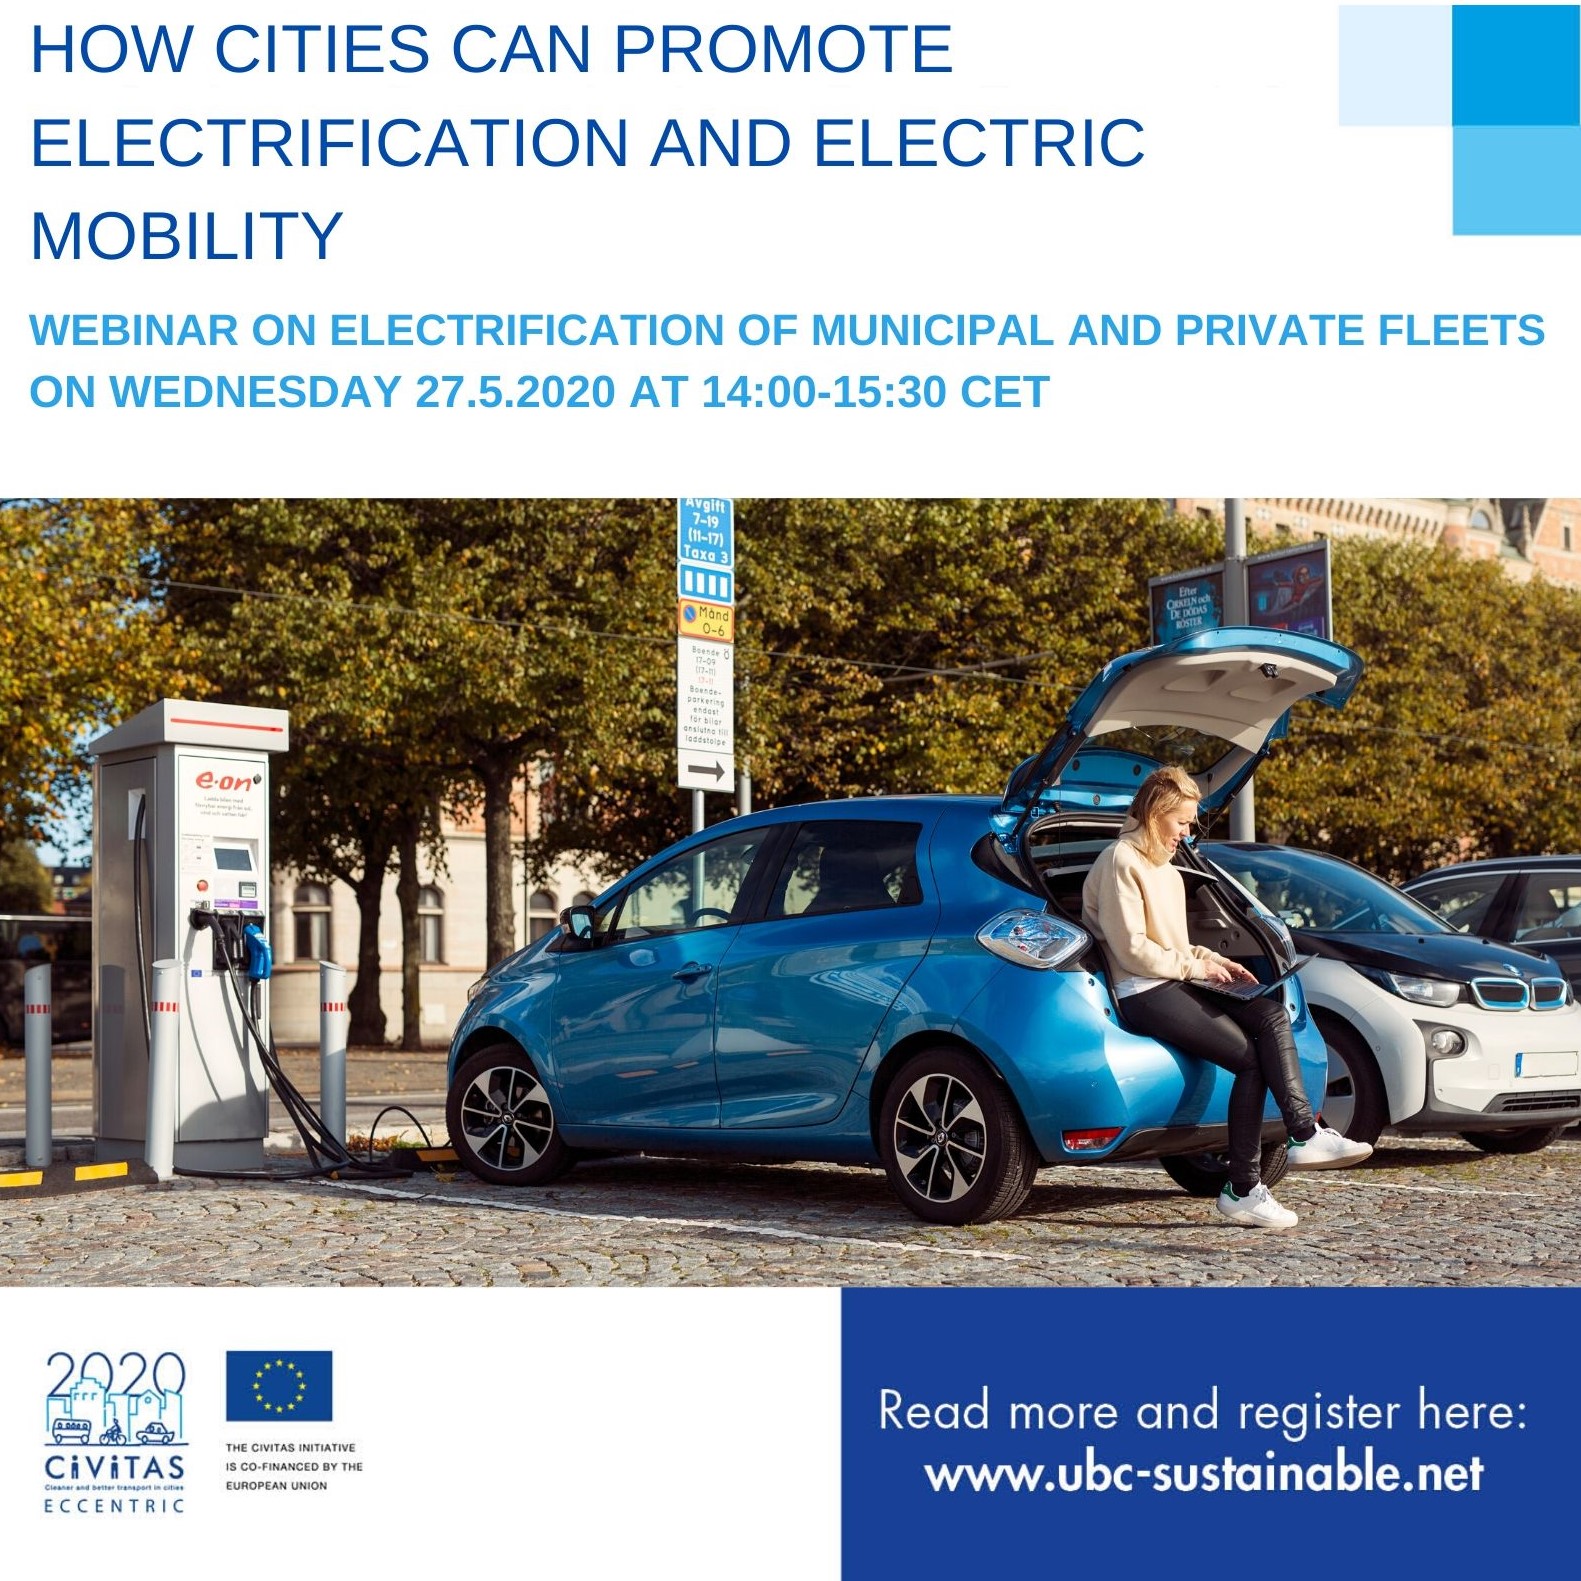 CIVITAS ECCENTRIC Webinar: How cities can promote electrification and electric mobility